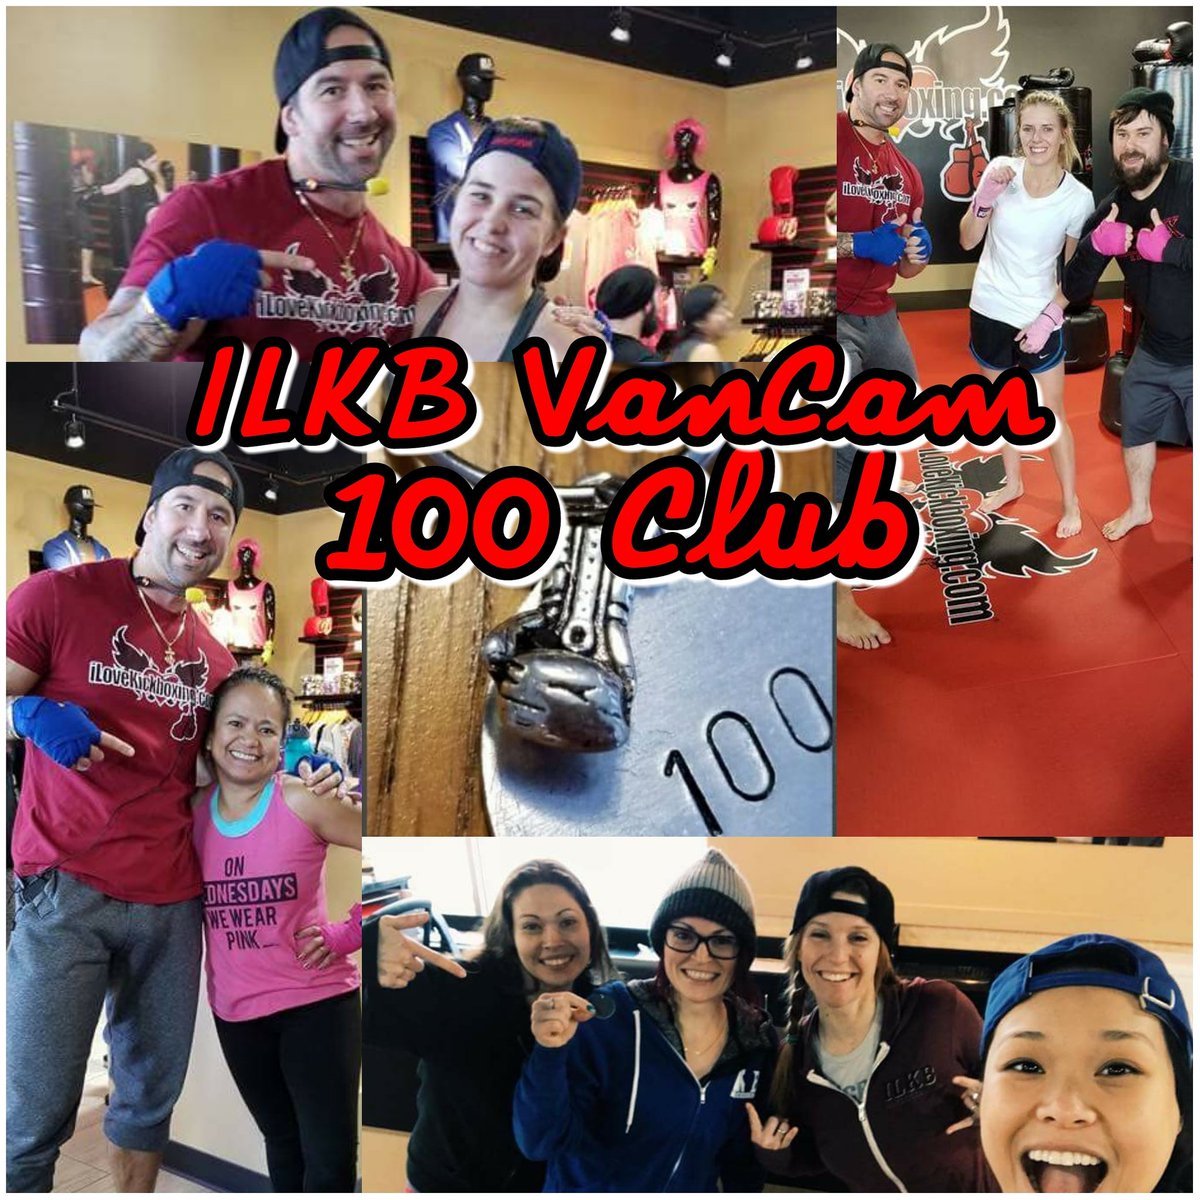 ilkbvancam 3 times, count them 3 times today we gave out 100 key tags! ...and one yesterday - Say what?! Savana Eckert, Kelsey Kinney, and Myra Brock, Chelsea Robb all put their time in on the mat! 100hours! #vitamins4kids #ilkbvancam100club #100hours💯 #NoExcuses #goals